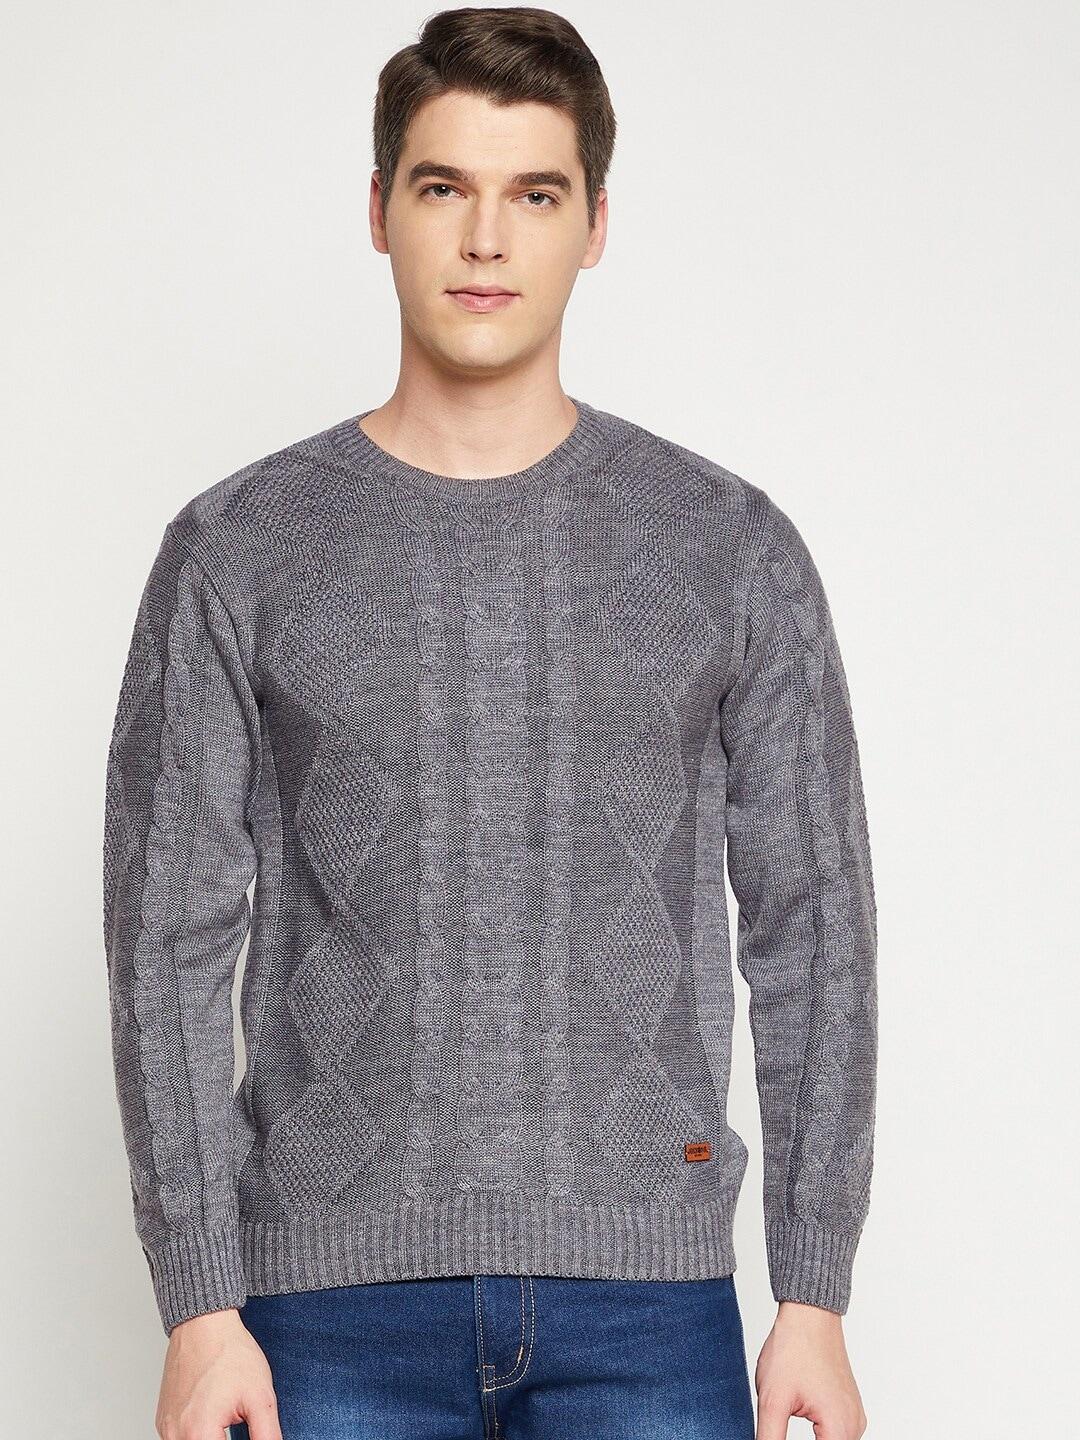 duke-men-grey-cable-knit-pullover